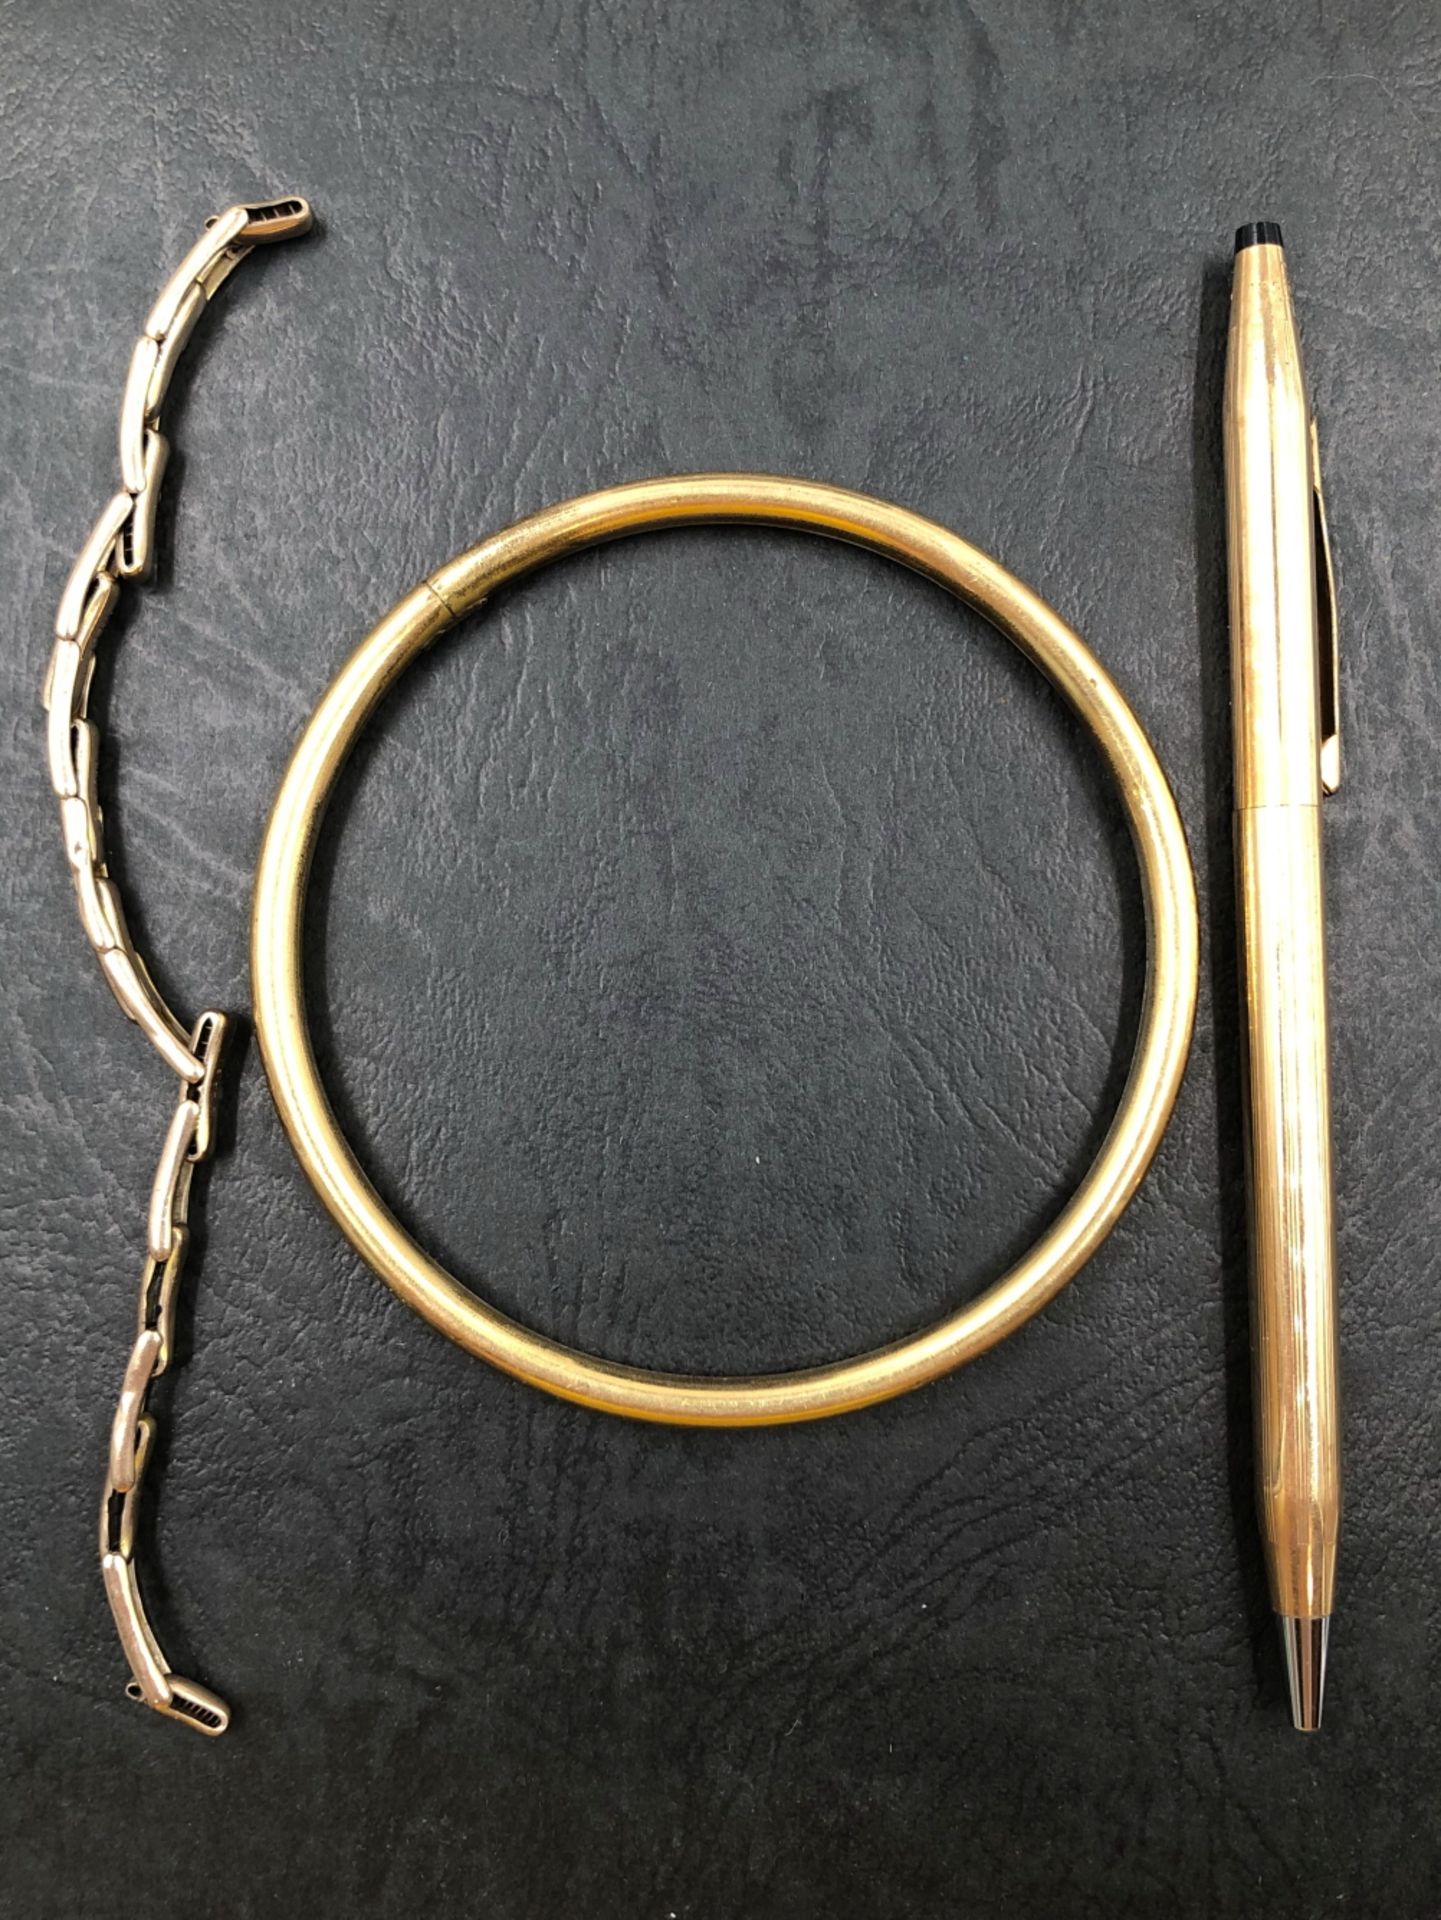 A ROLLED GOLD ARM BANGLE, A 14KT ROLLED GOLD CROSS PEN, AND 9ct GOLD SPRUNG AND EXPANDING WATCH